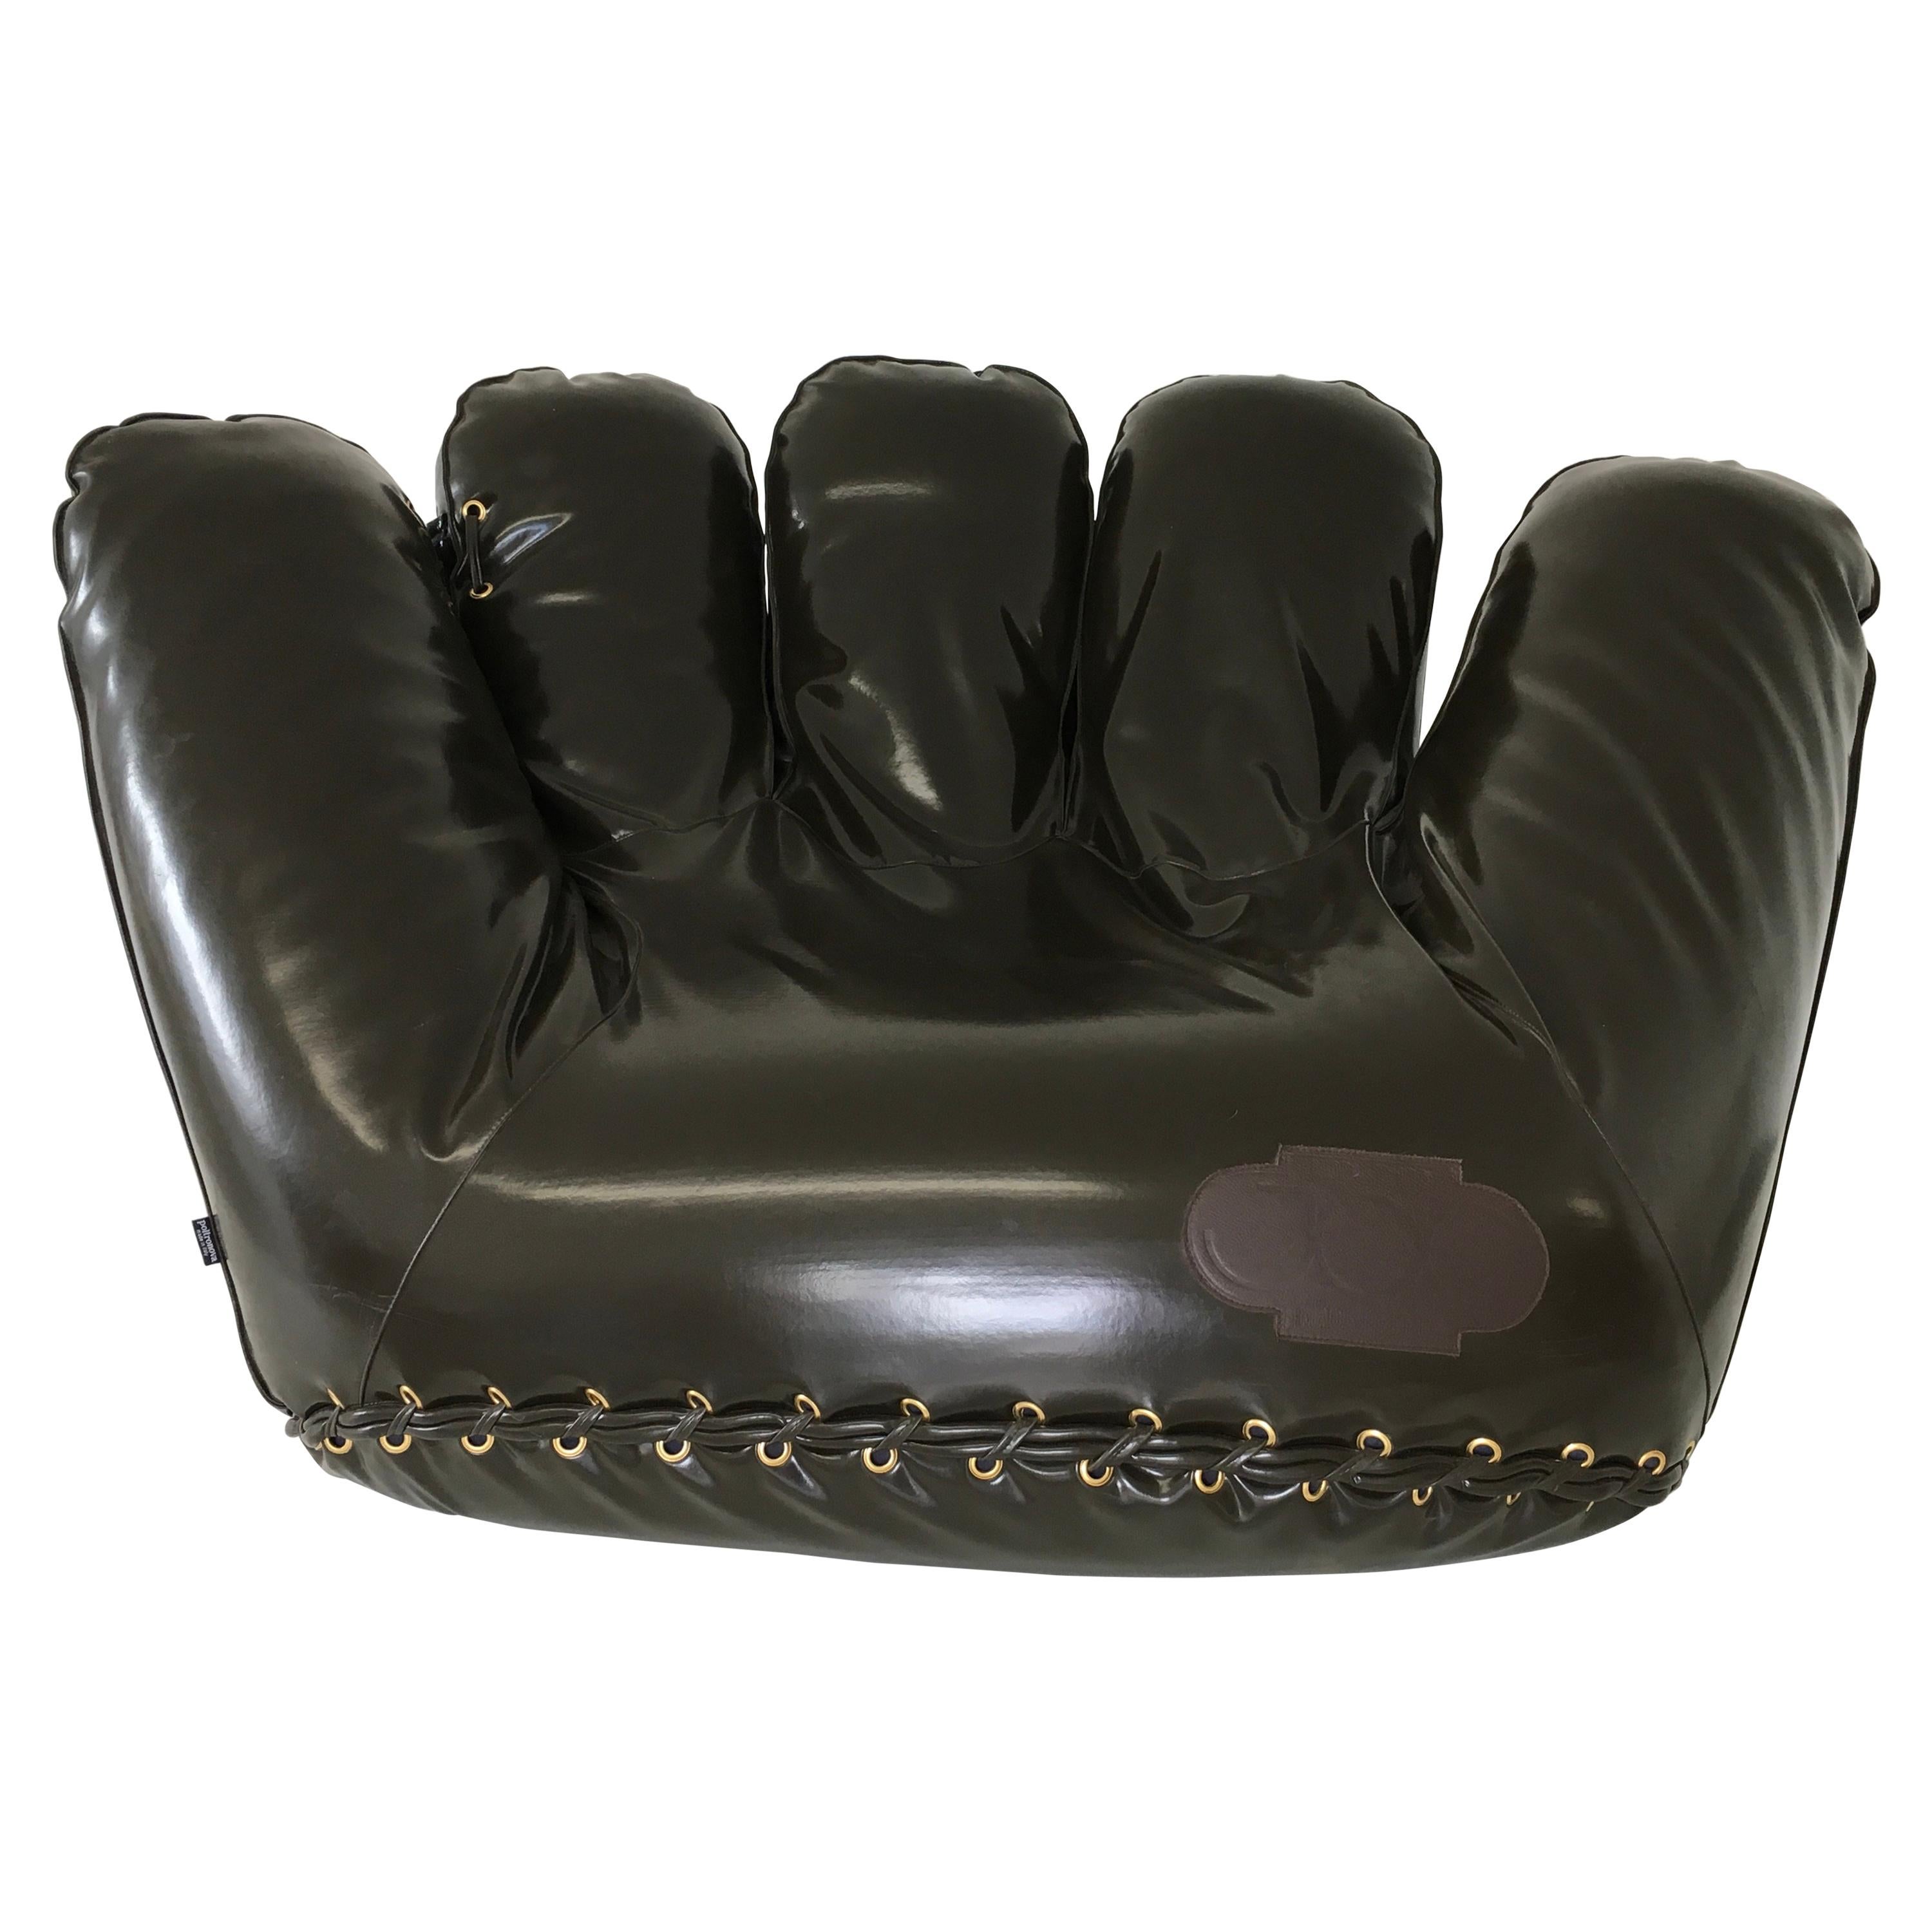 Poltronova "Joe" Chair in Patent Leather For Sale